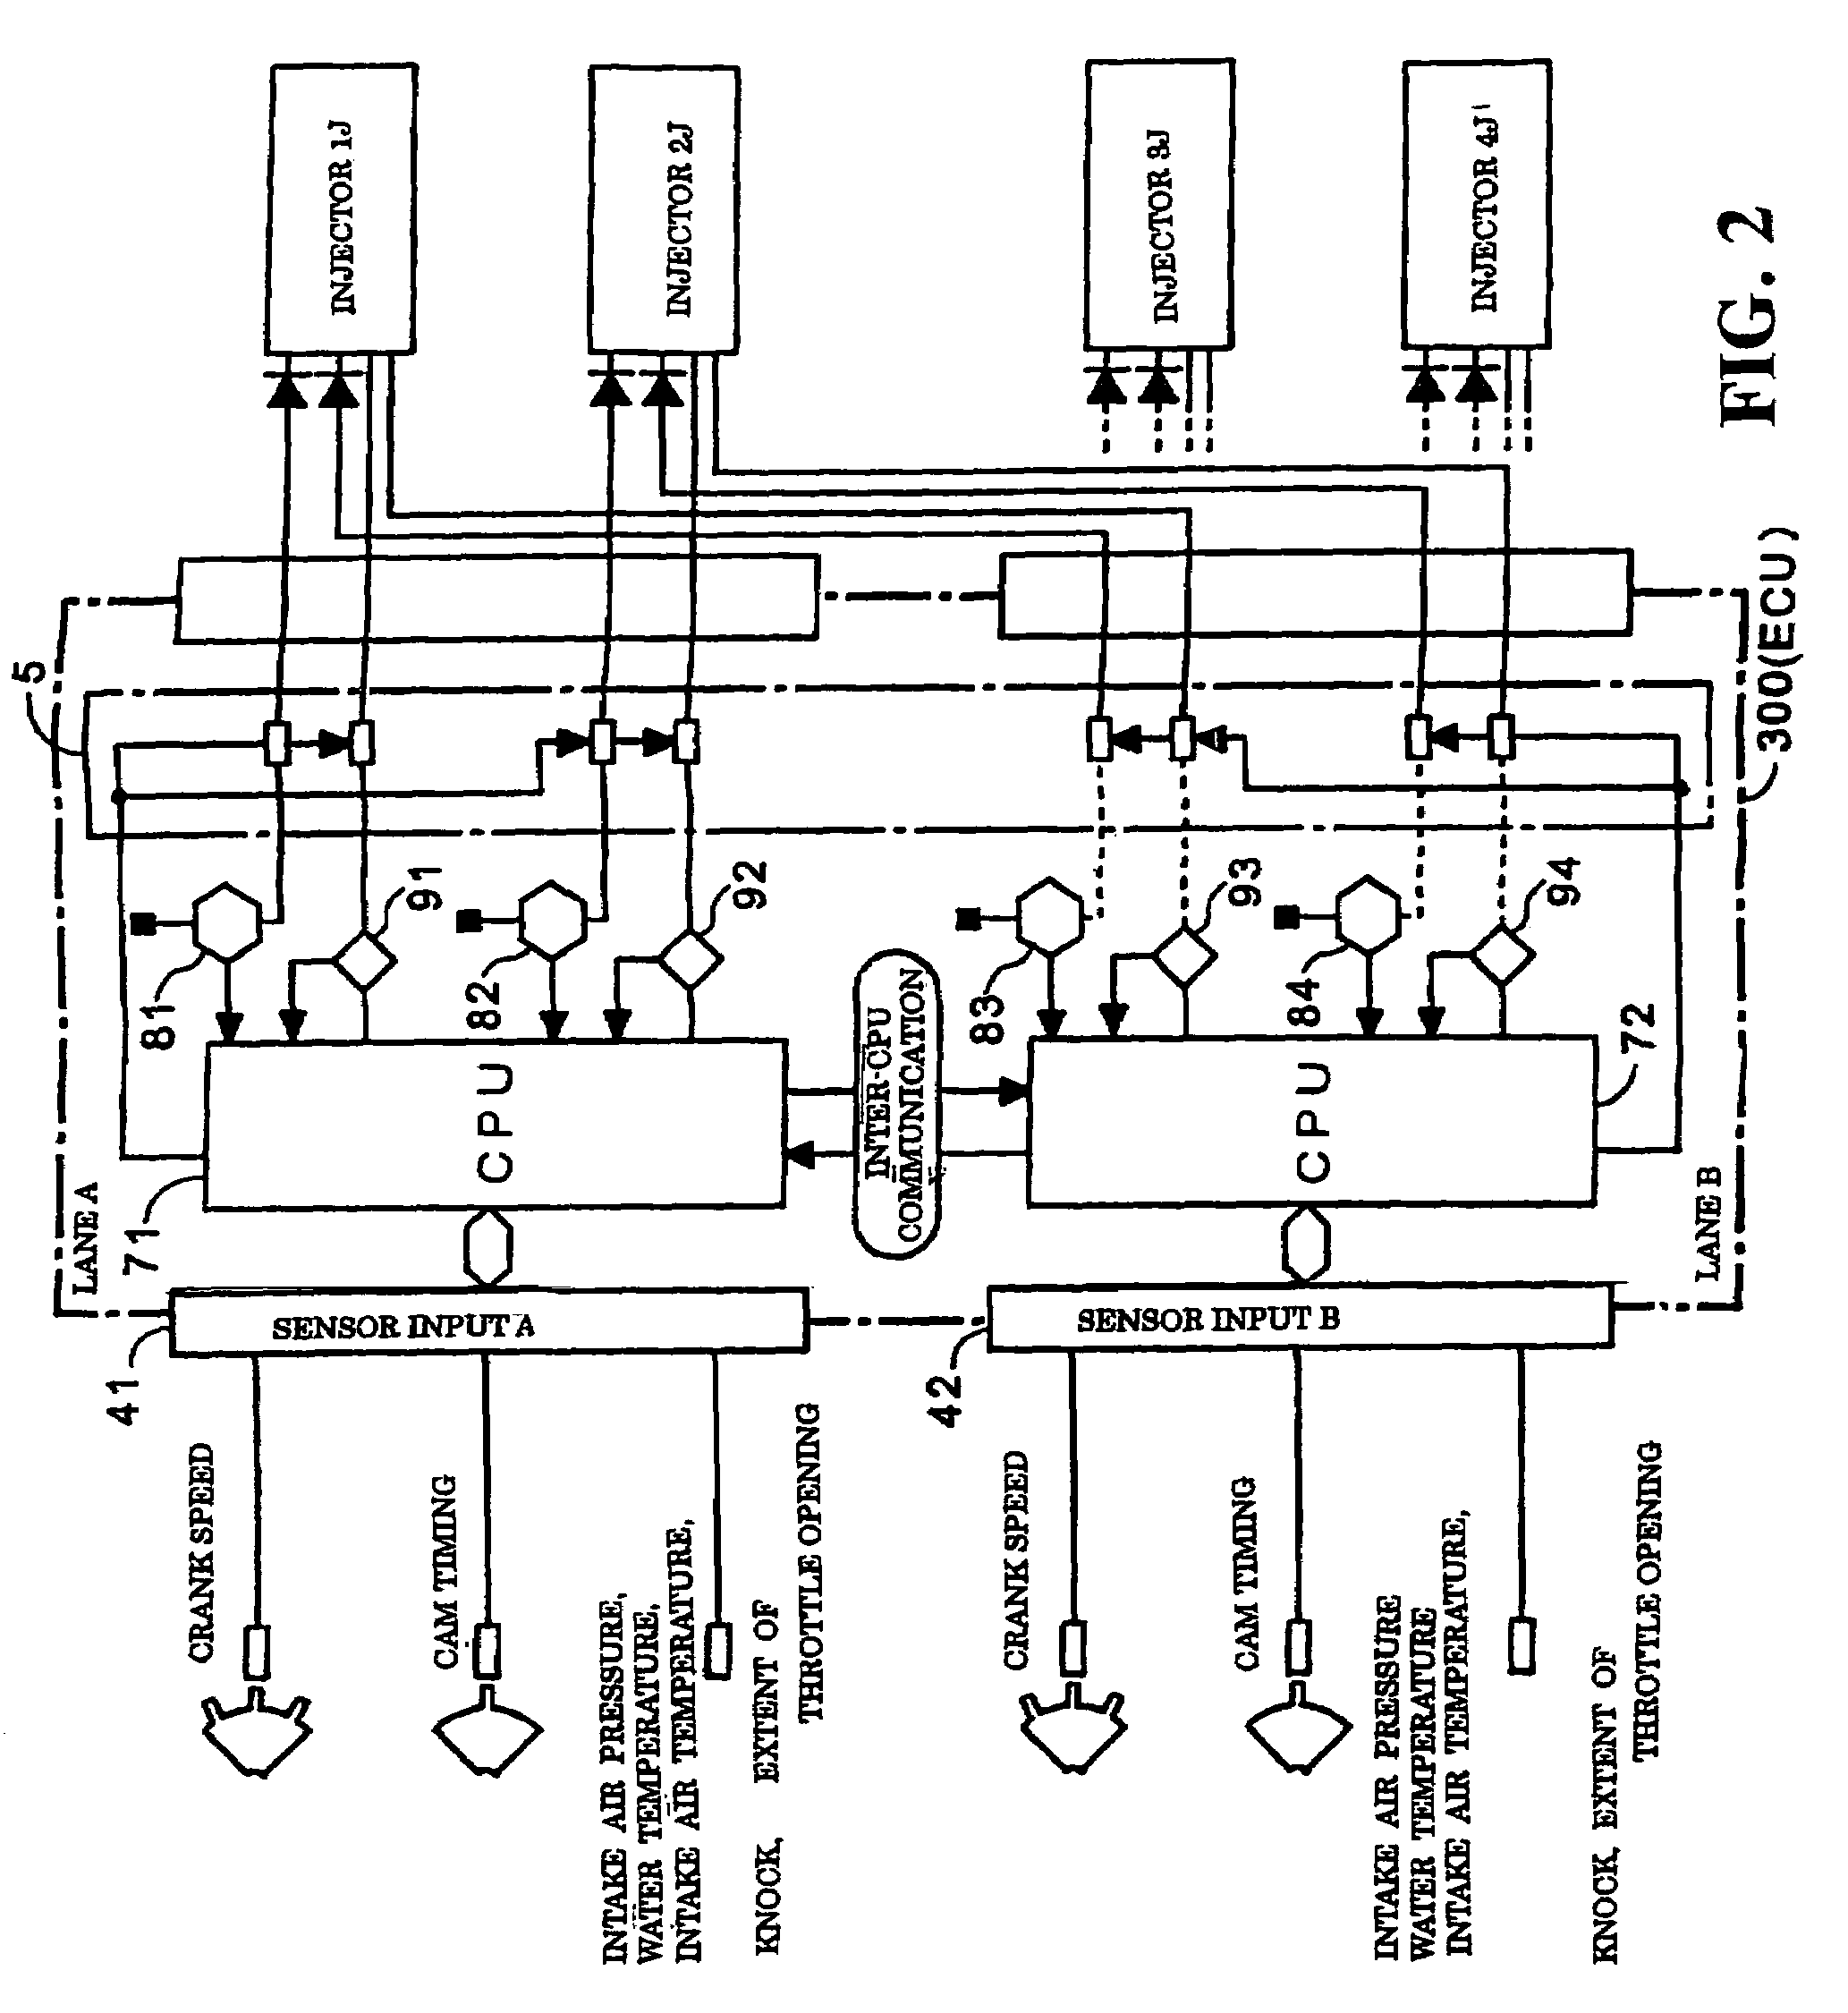 Electronic control device for aviation engine